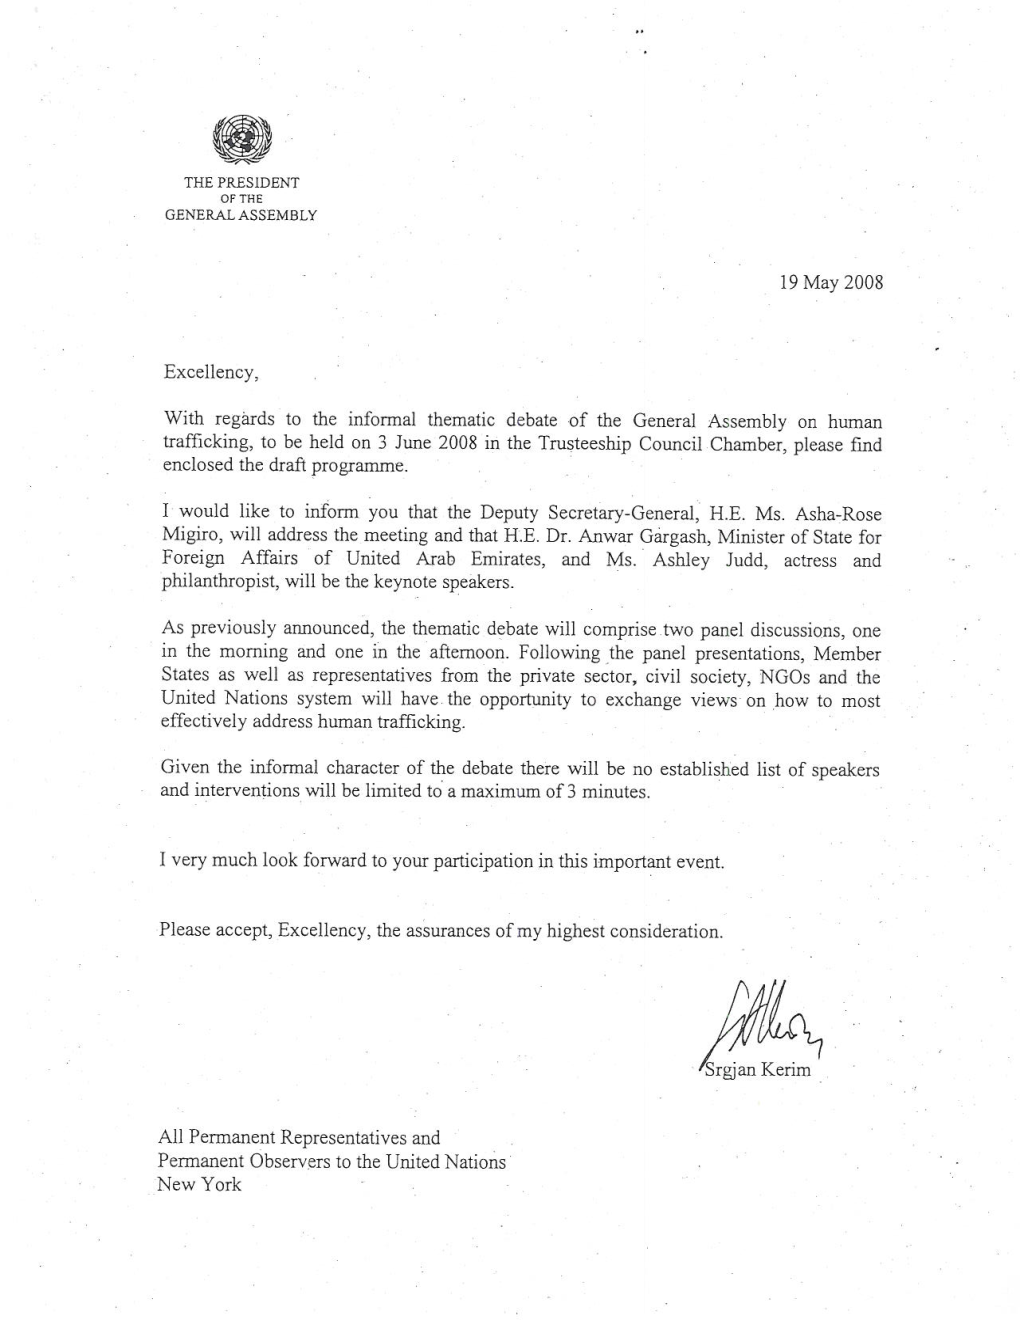 Letter Regarding the Thematic Debate on Human